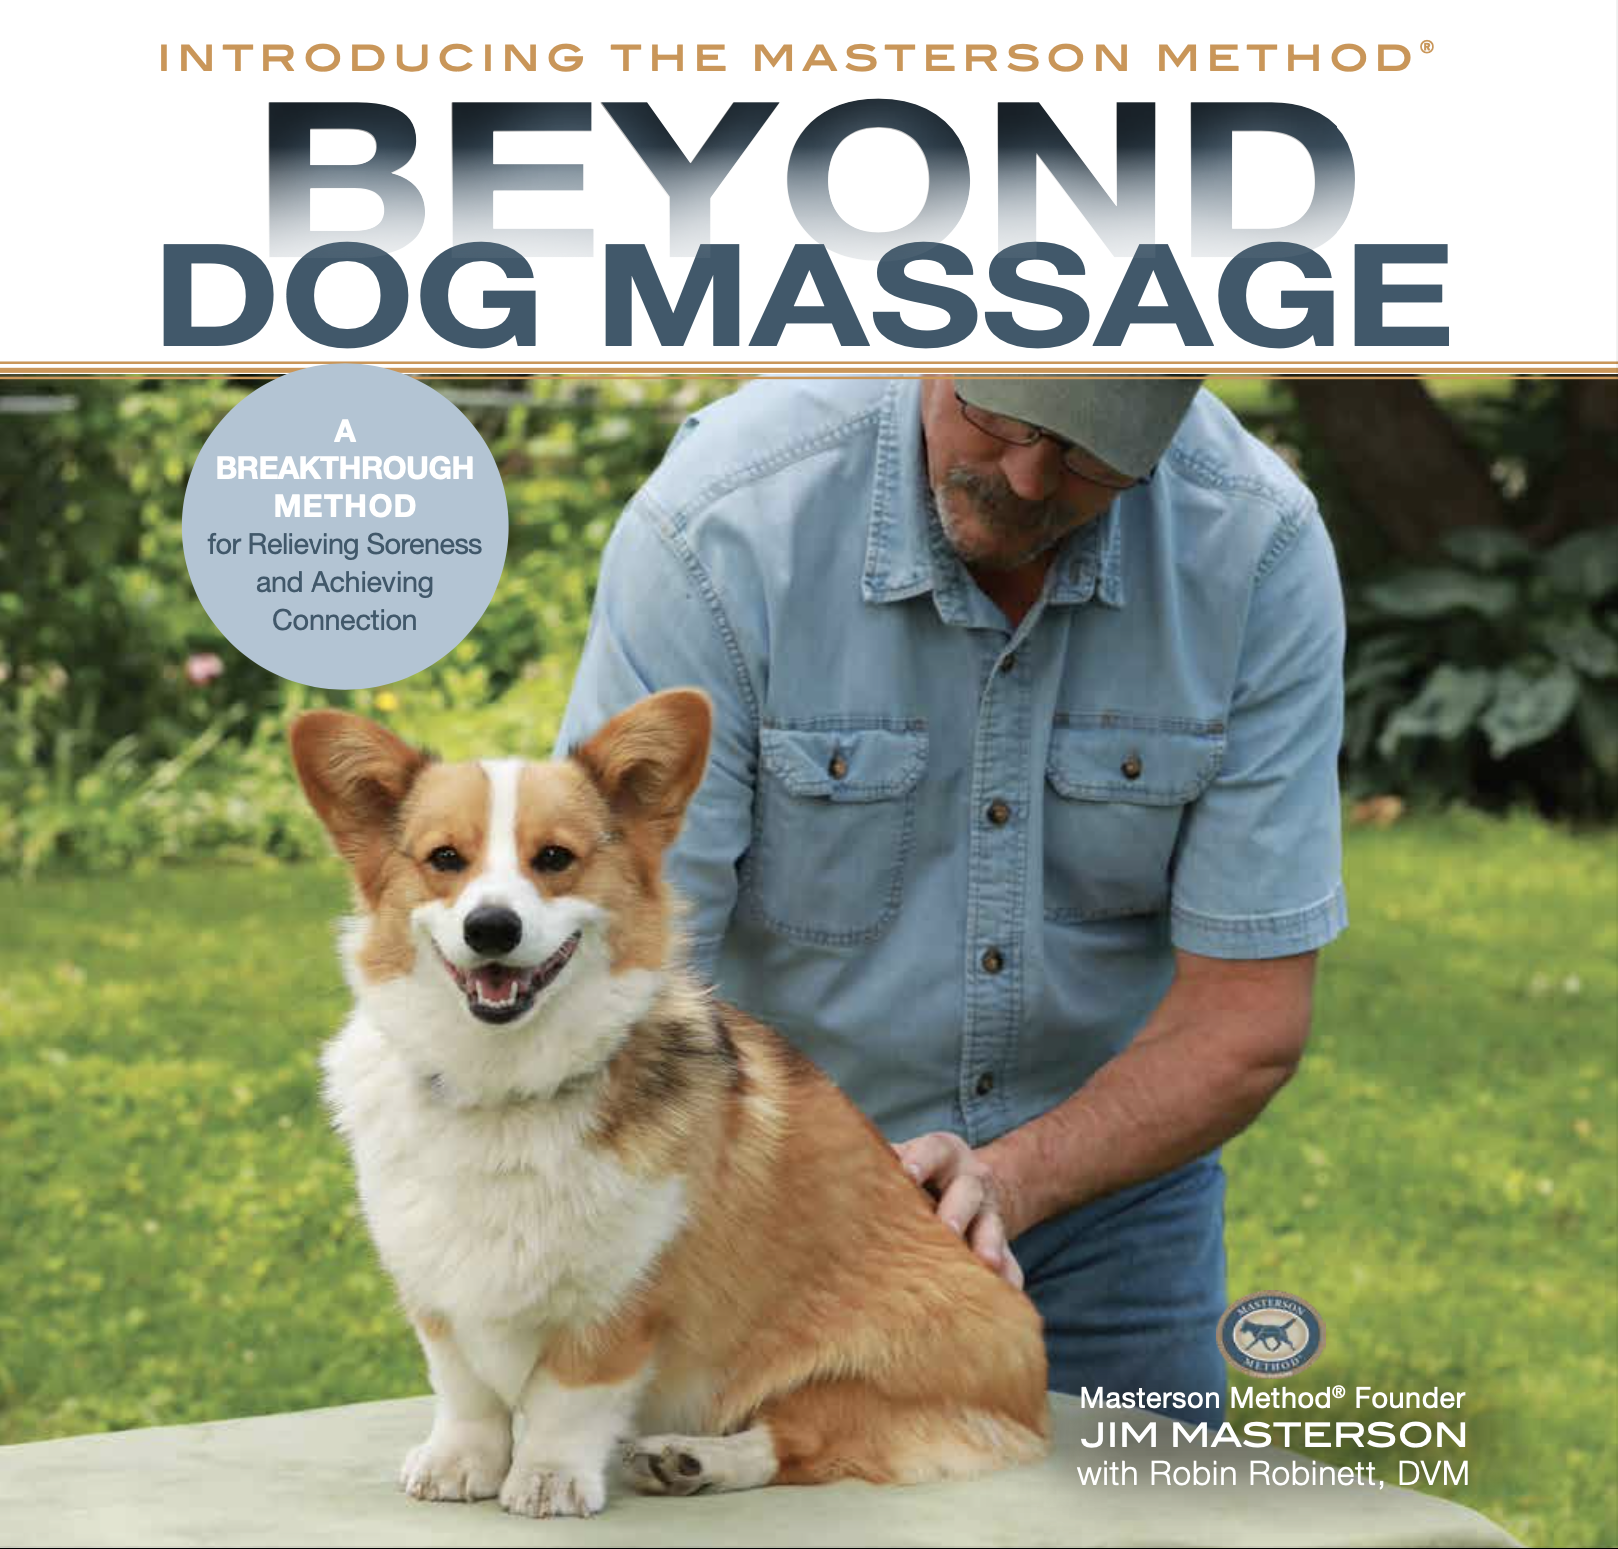 Book Cover, Introducing The Masterson Method, Beyond Dog Massage